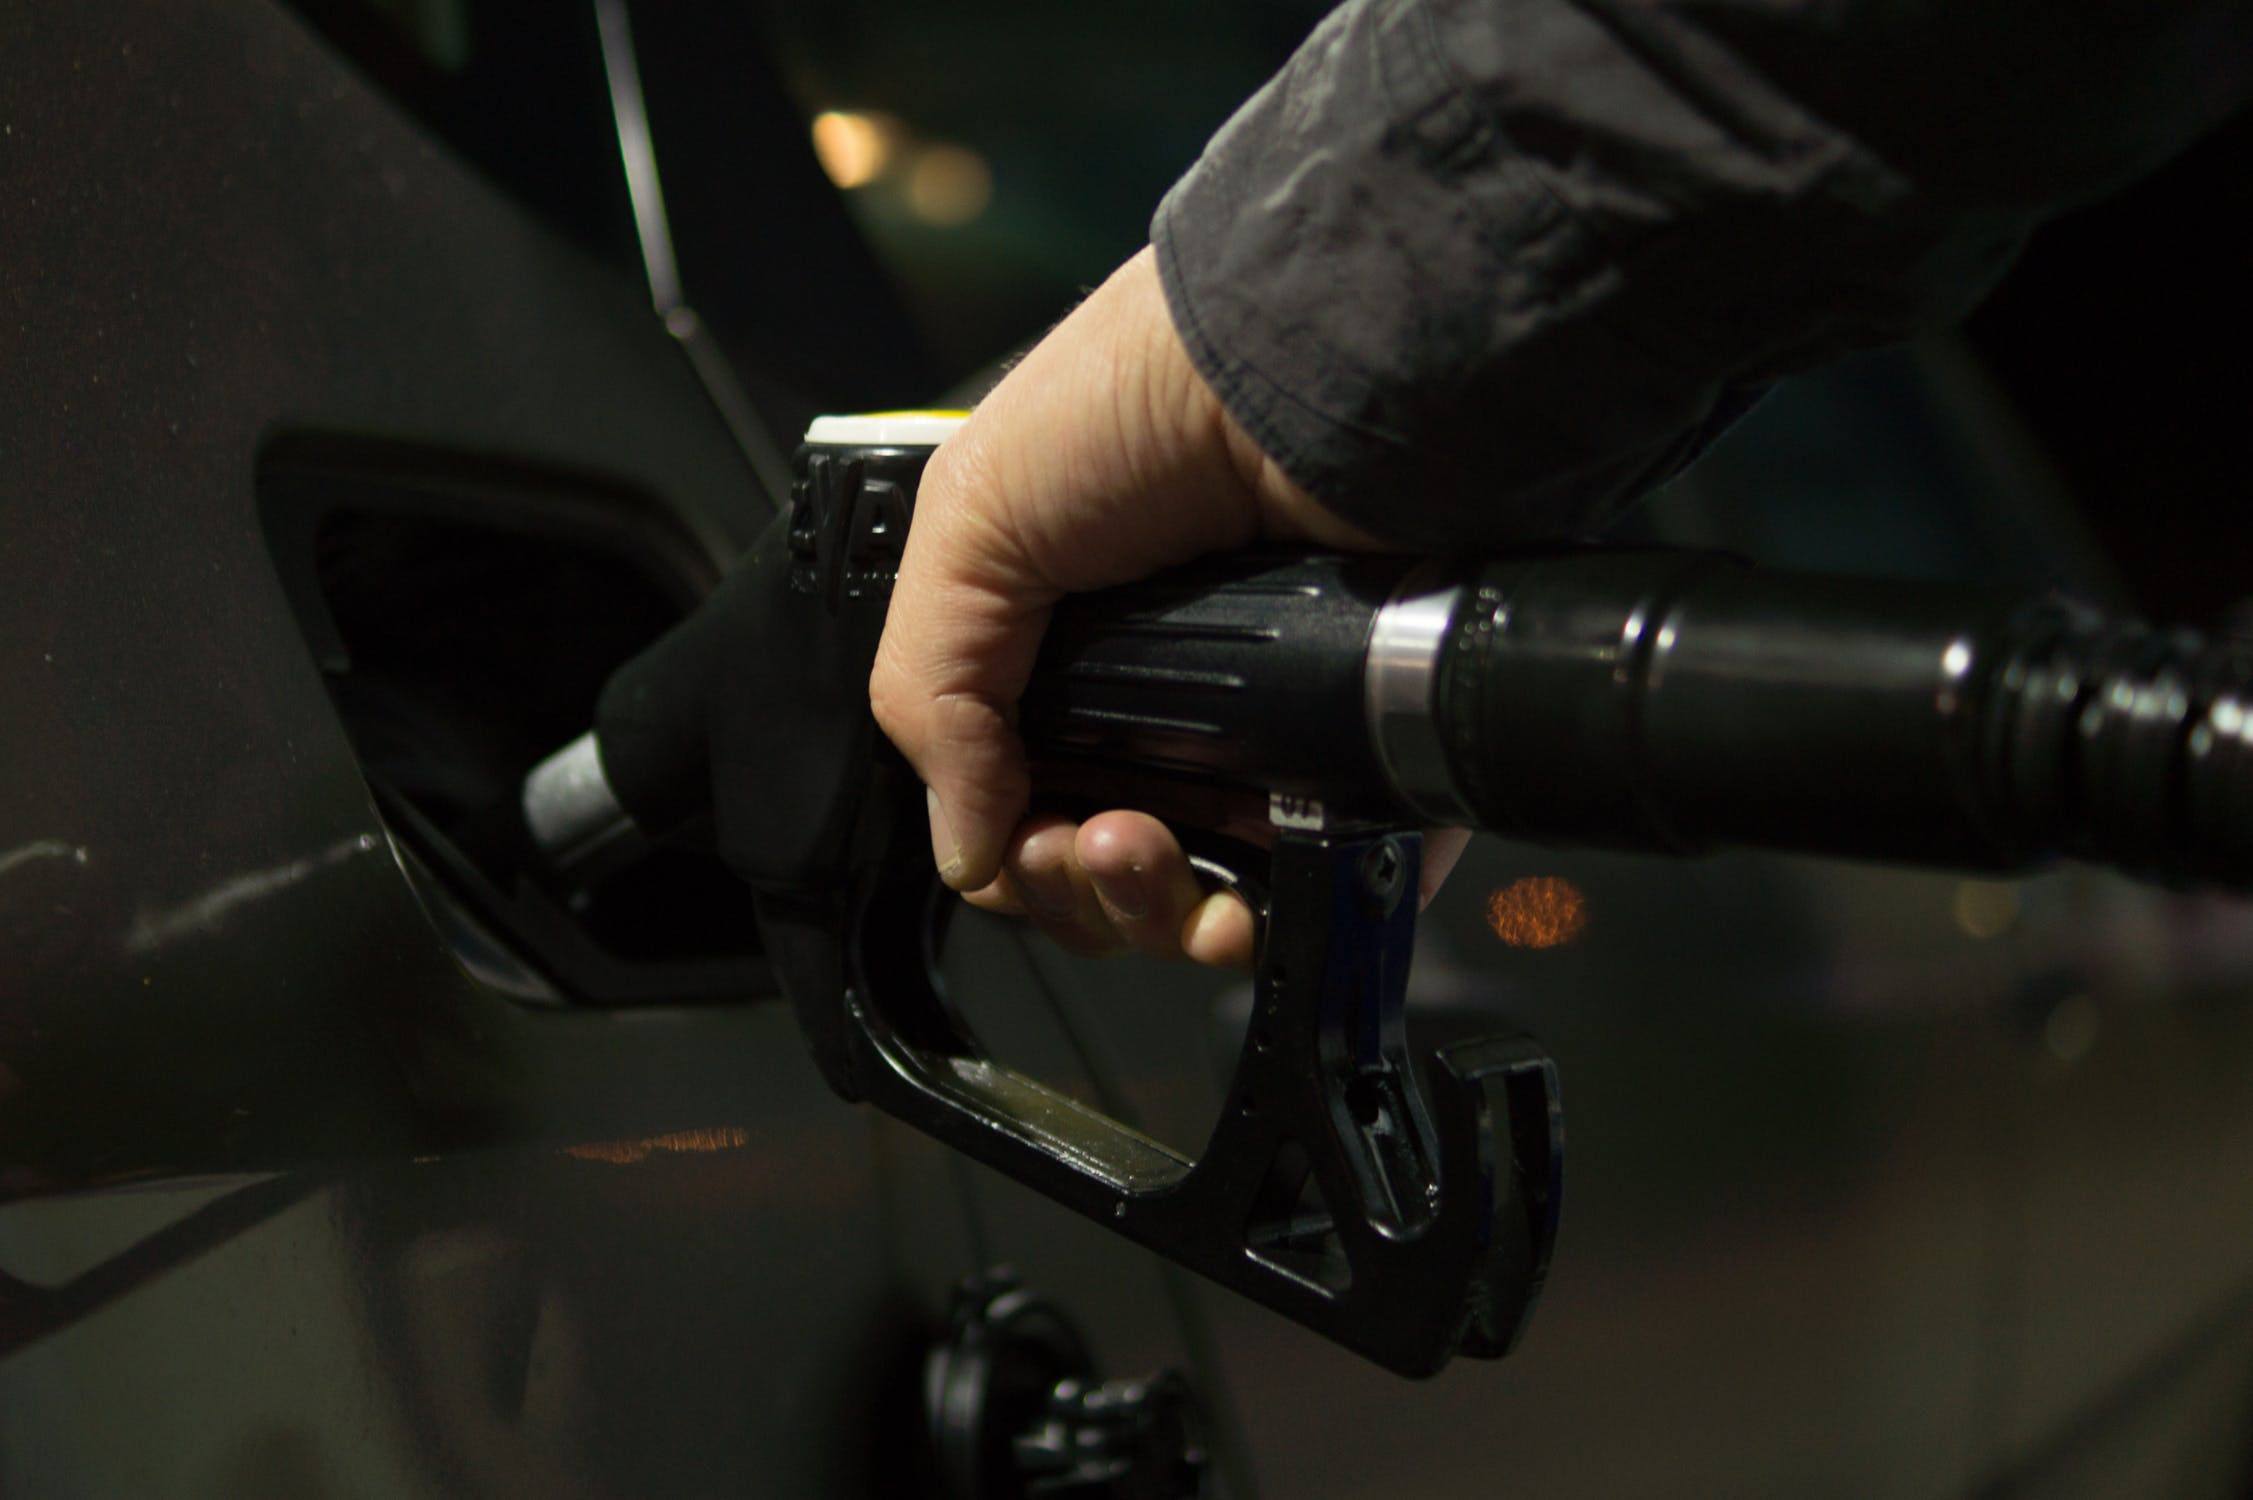 Fuel prices are unpredictable and may increase from time-to-time. To reduce gas costs, buying electric or hybrid cars is a wise consideration when buying a car.